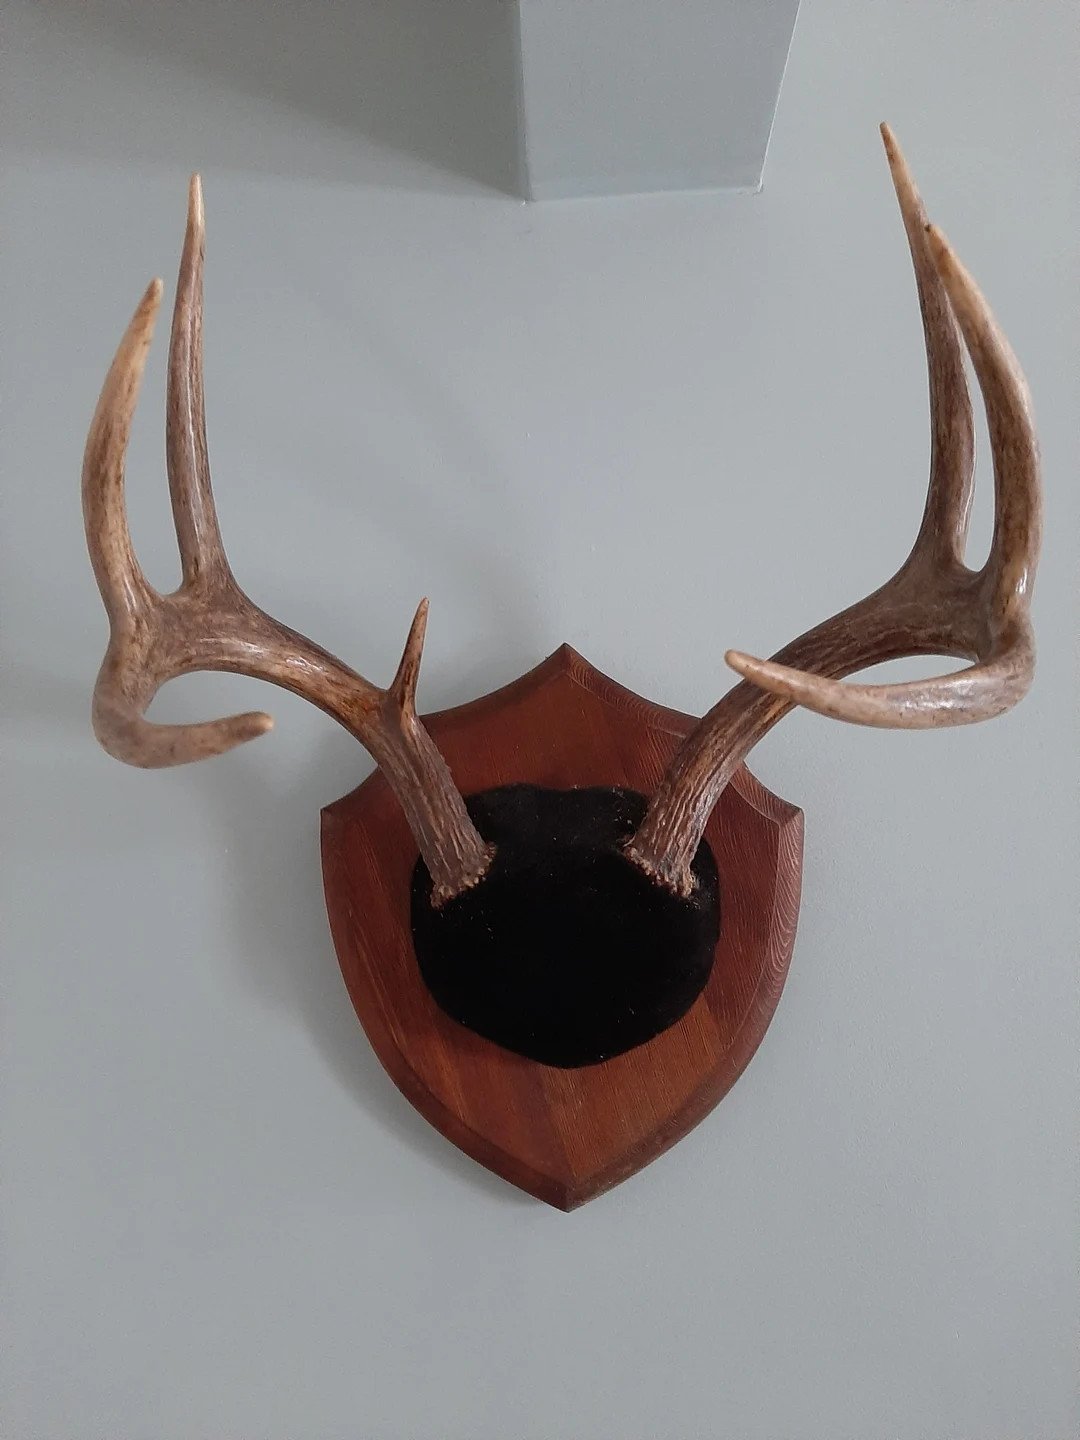 3 Point Deer Antlers Mounted on a Wood Plaque. Dated 1990. - Etsy